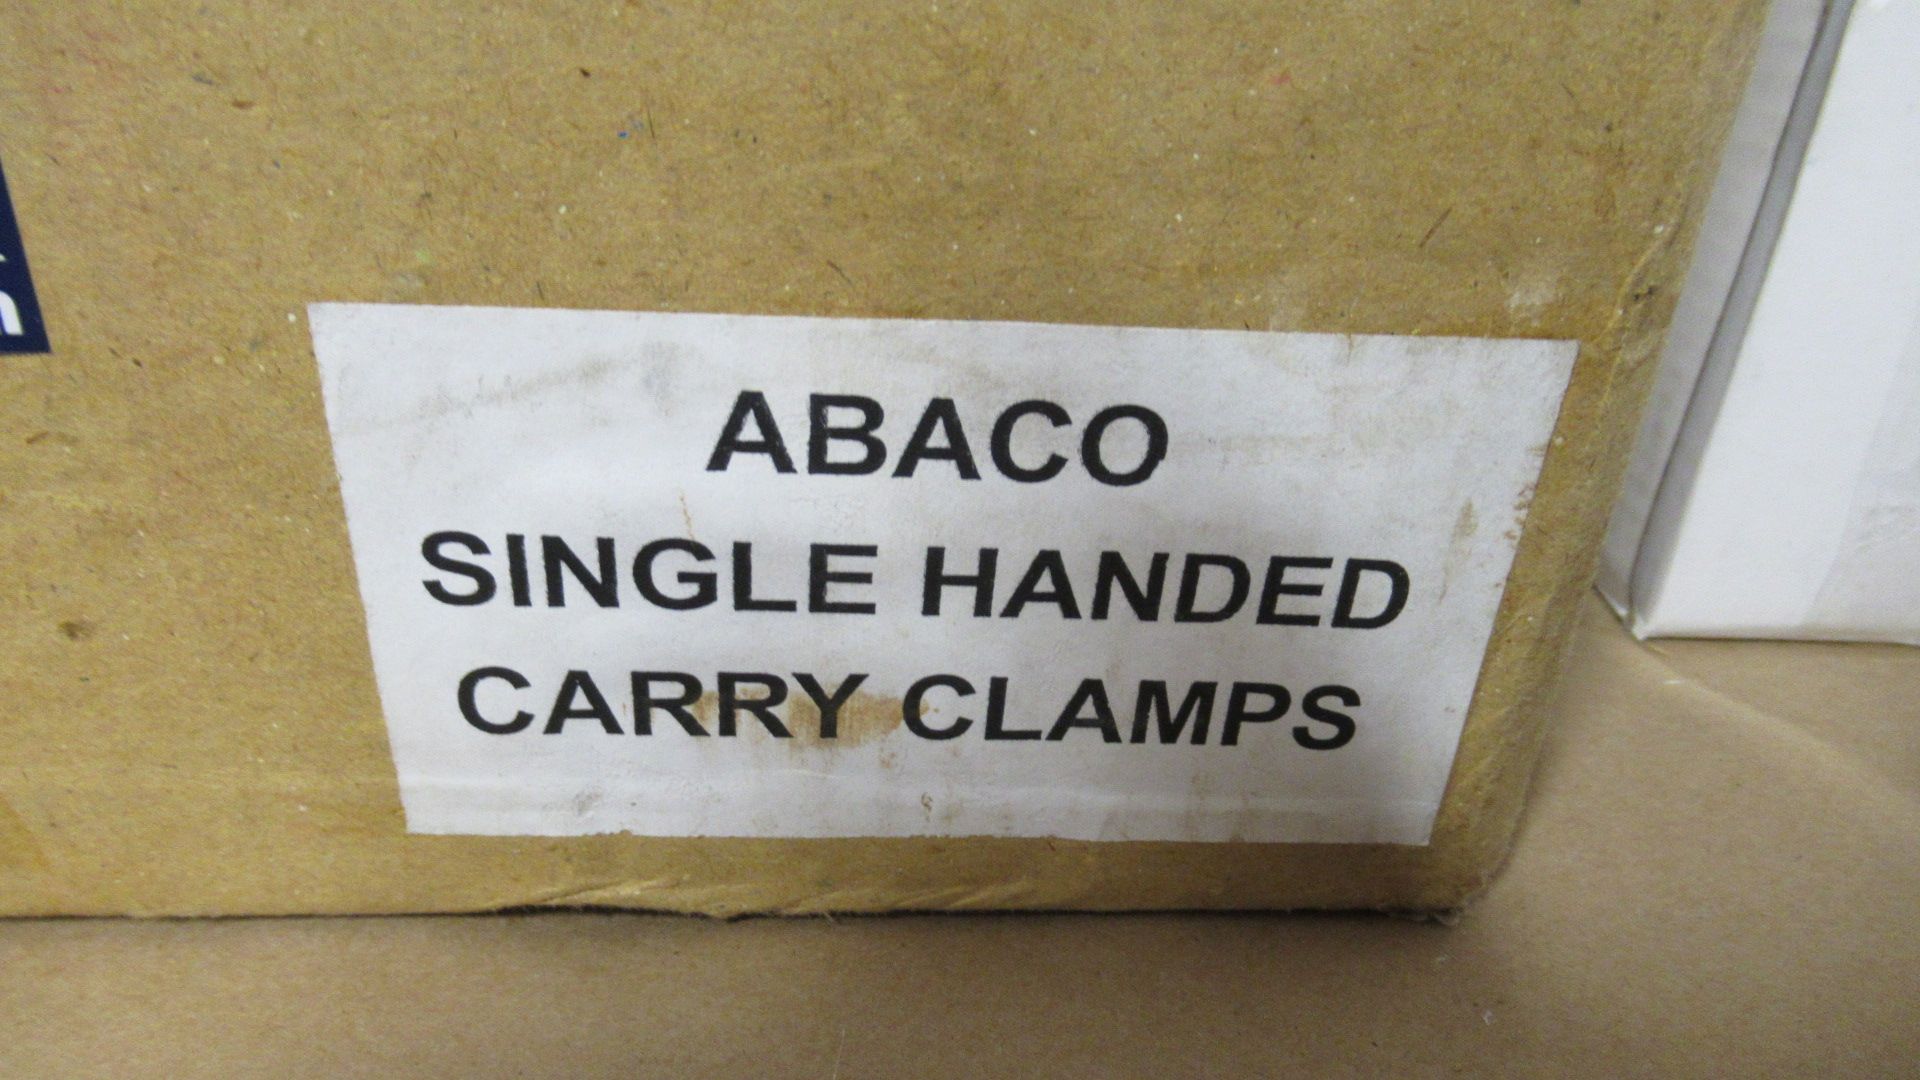 ABACO SINGE HANDED CARRY CLAMP SET - Image 2 of 2